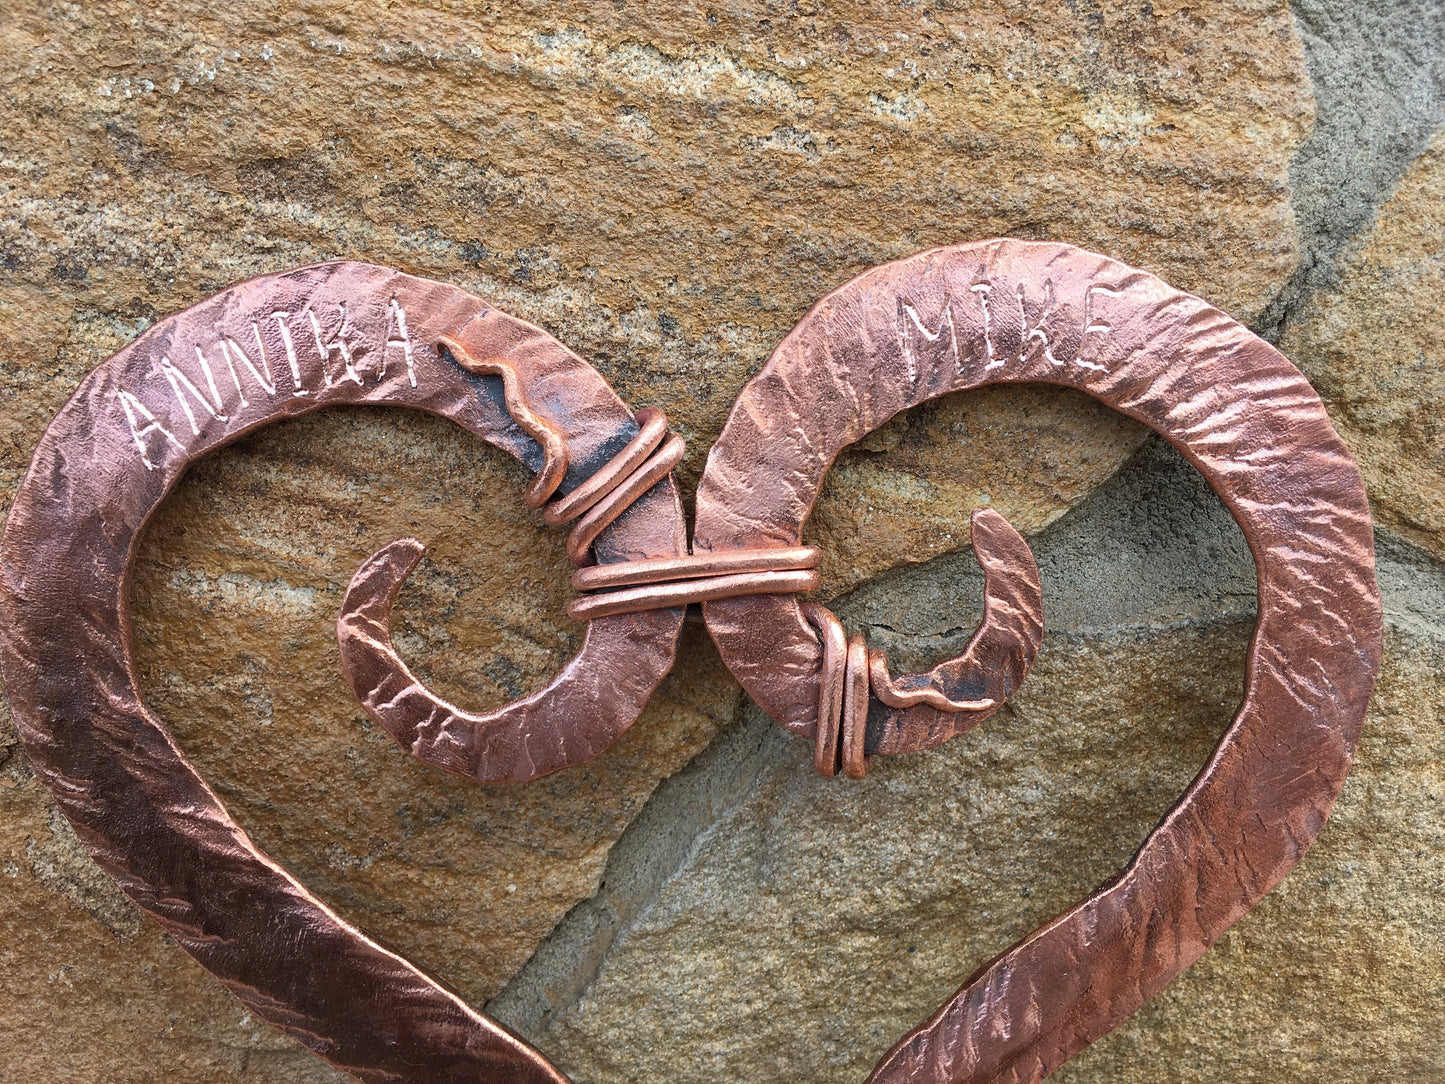 Copper gift, 7 year gift, 7th anniversary gift, copper anniversary gift, copper heart, copper gifts, copper gift for her, copper wedding